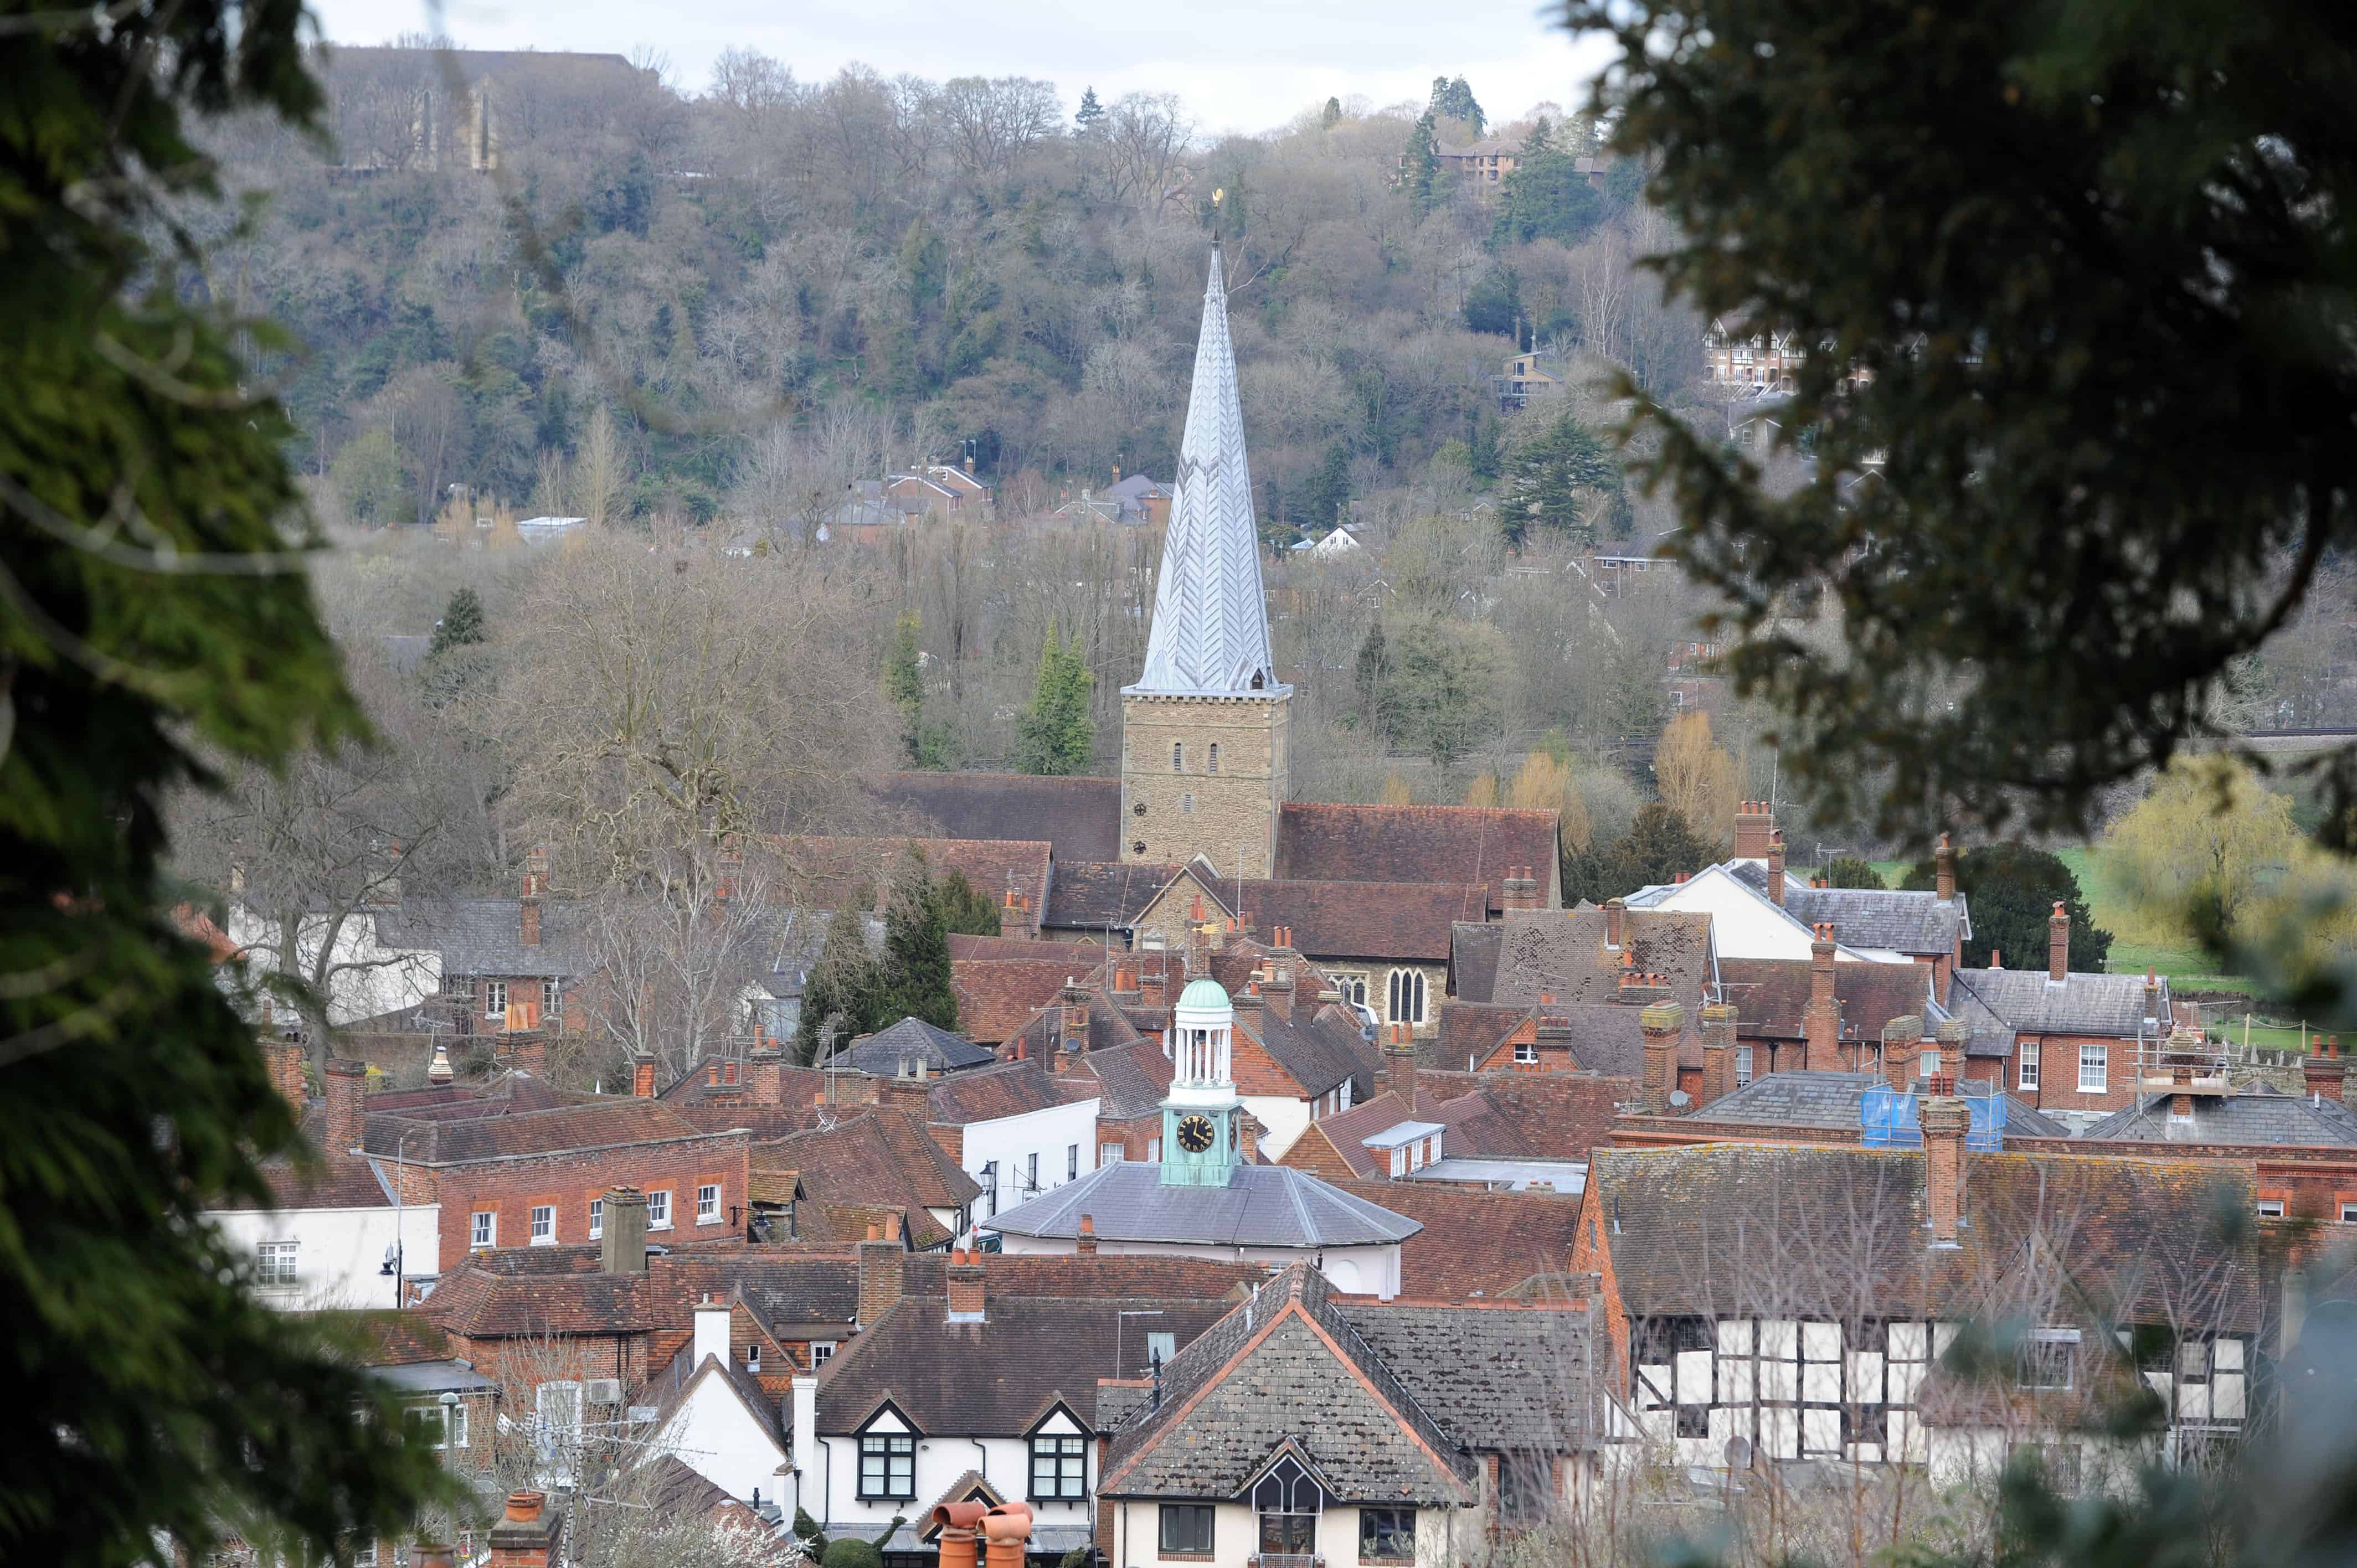 View across rooftops of Godalming showing the cupola of The Pepperpot and the spire of the parish church from the vantage point of St Edmund's Steps with wooded hillside on the opposite side of the valley